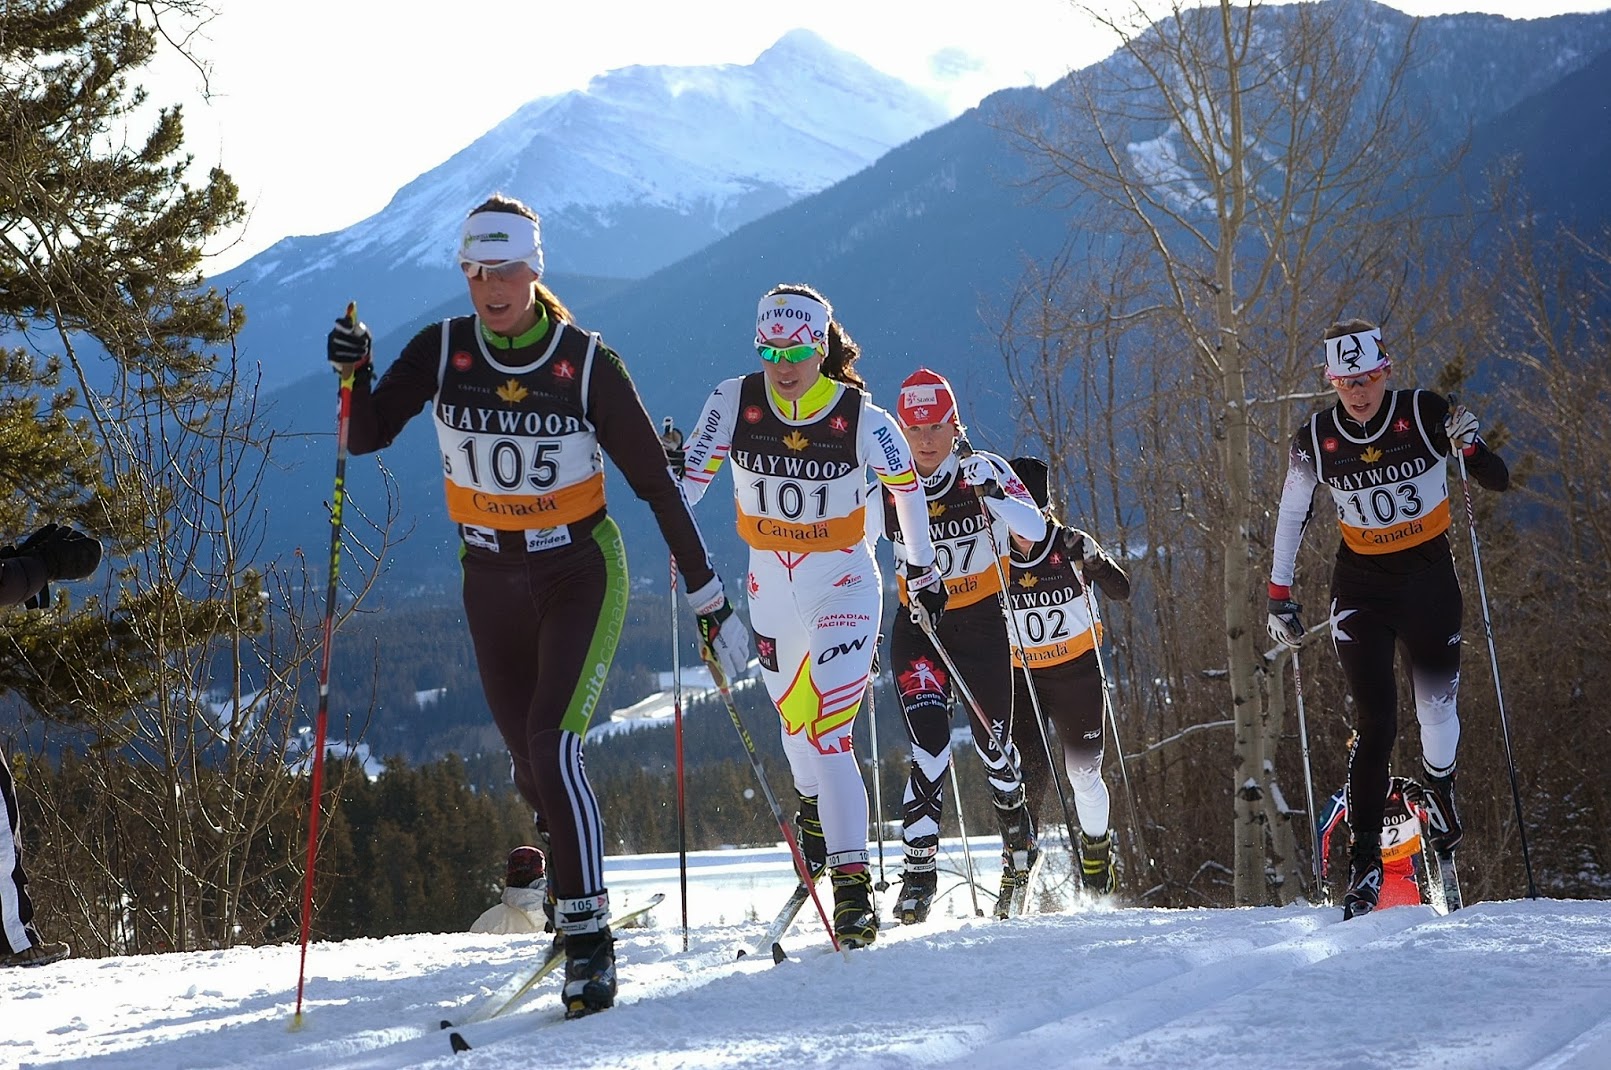 Emily Nishikawa (101) follows Brittany Webster (105) in the women's 15 k skiathlon at Canadian Olympic Team Trials on Jan. 12 in Canmore, Alberta. Nishikawa placed sixth in the final race of the trials, securing her spot at the 2014 Sochi Olympics from Feb. 7-23. Webster took second after winner Amanda Ammar (102). (Photo: Angus Cockney)